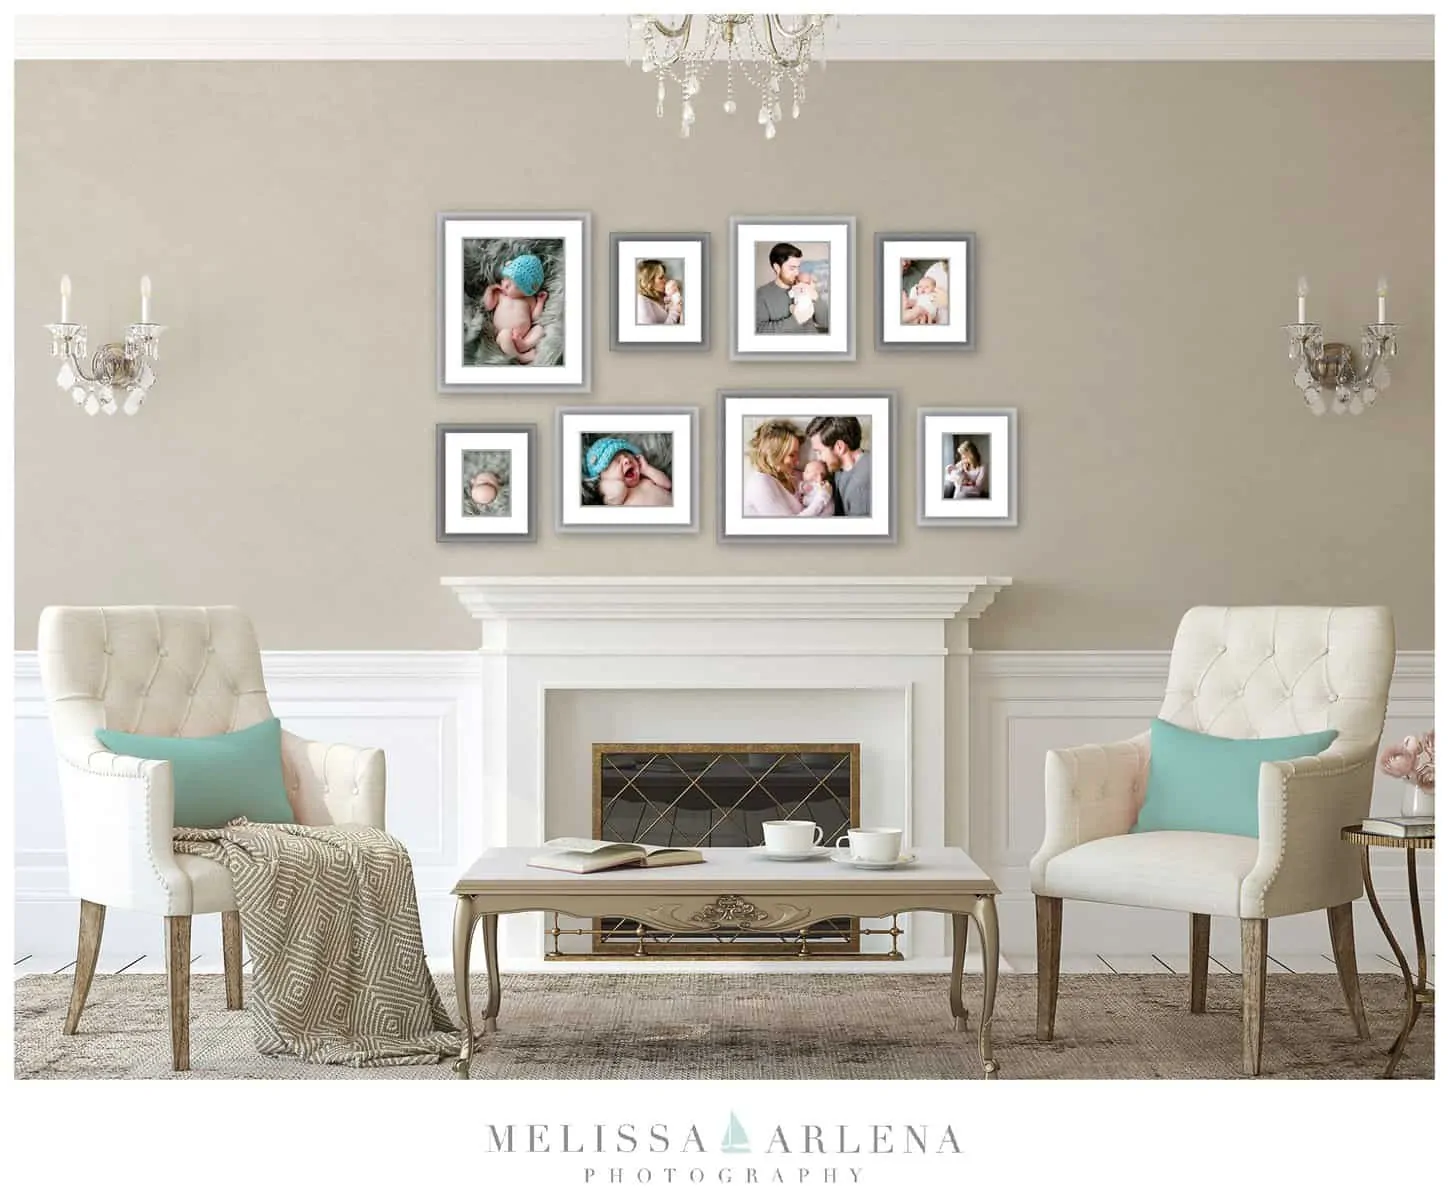 Decorating Your Home With Photos - Mixing Frames Formally by Melissa Arlena www.melissaarlena.com